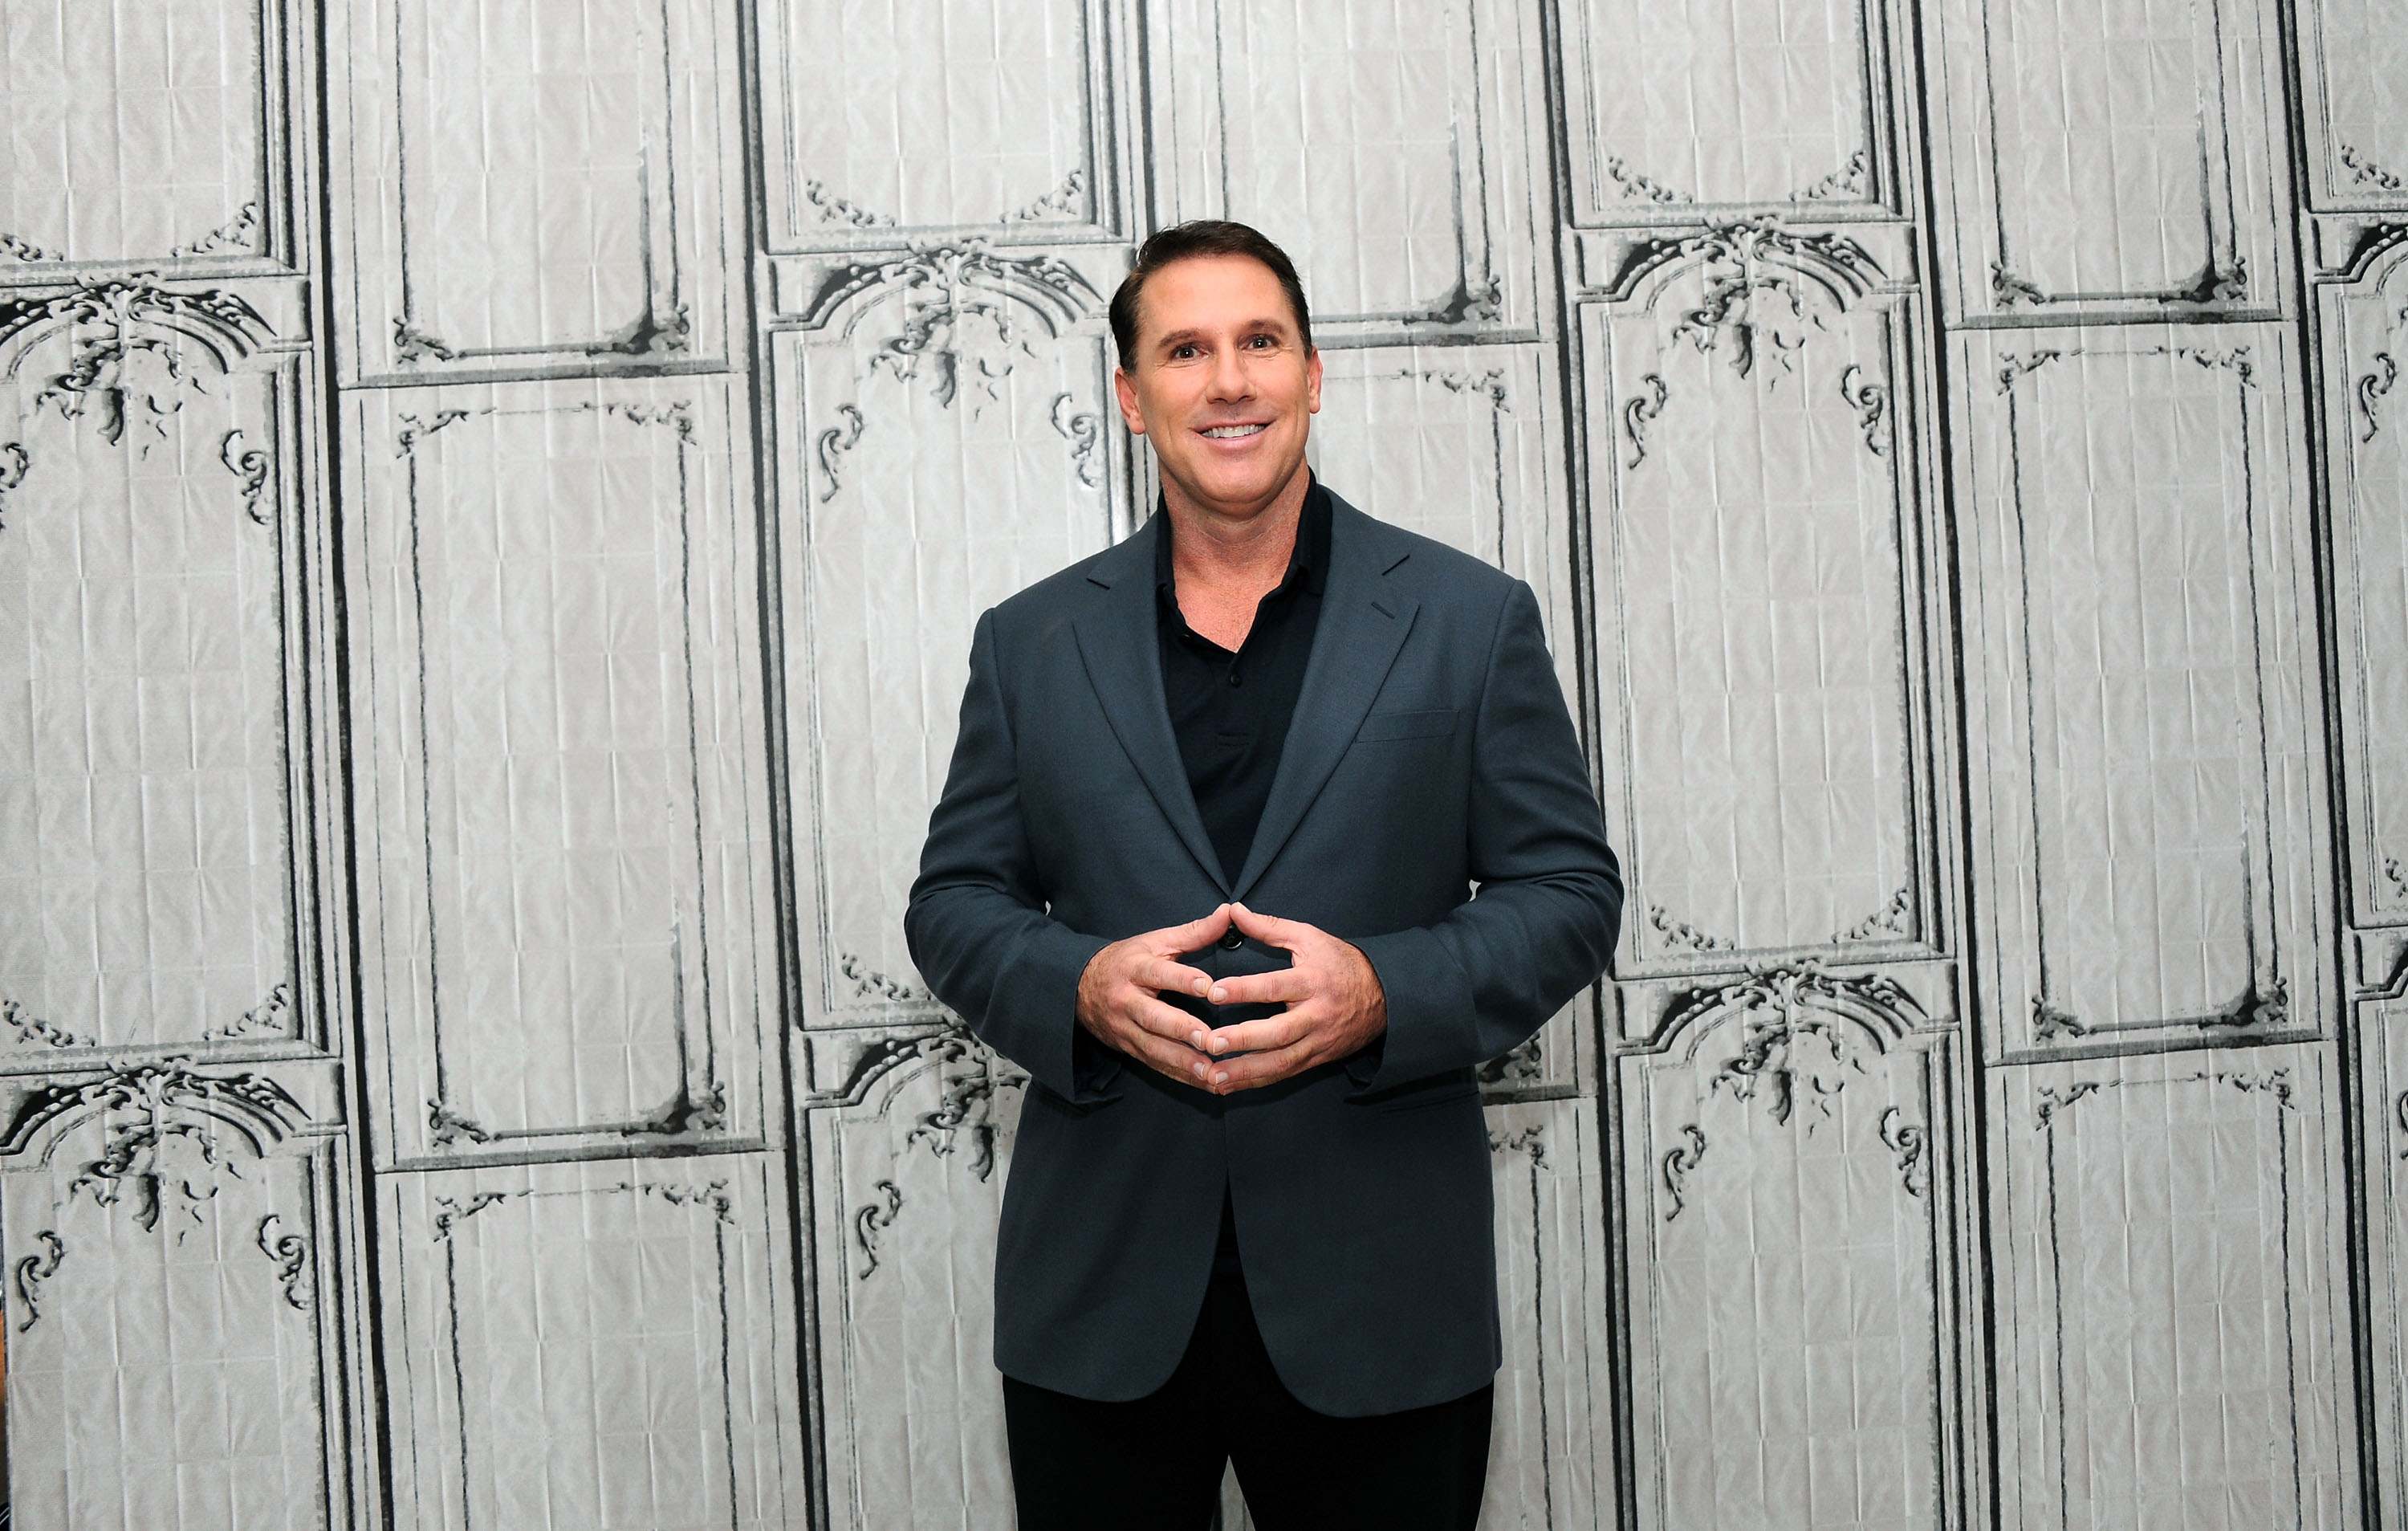 Writer Nicholas Sparks at AOL Studios In New York on October 15, 2015 in New York City. (Desiree Navarro&mdash;WireImage/Getty Images)